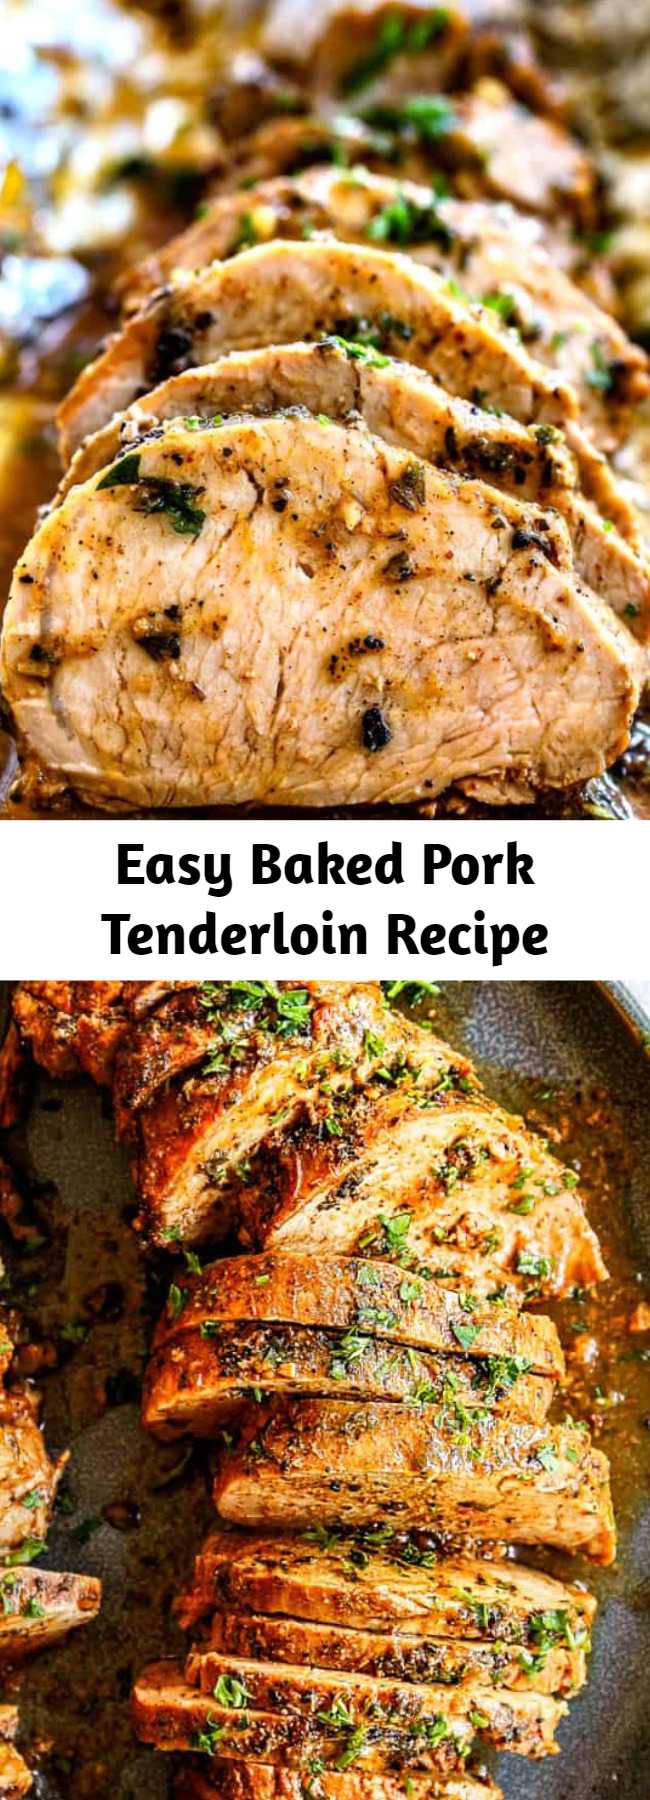 Easy Baked Pork Tenderloin Recipe - This Best Baked Pork Tenderloin recipe is outrageously juicy, bursting with flavor and so easy! It is melt-in-your-mouth-tender and dripping with tantalizing self-basting herb butter. #pork #porkrecipes #porktenderloin #dinner #recipes #dinnerrecipes #dinnerideas #dinnertime #easydinner #easydinnerrecipes #easterrecipes #easter